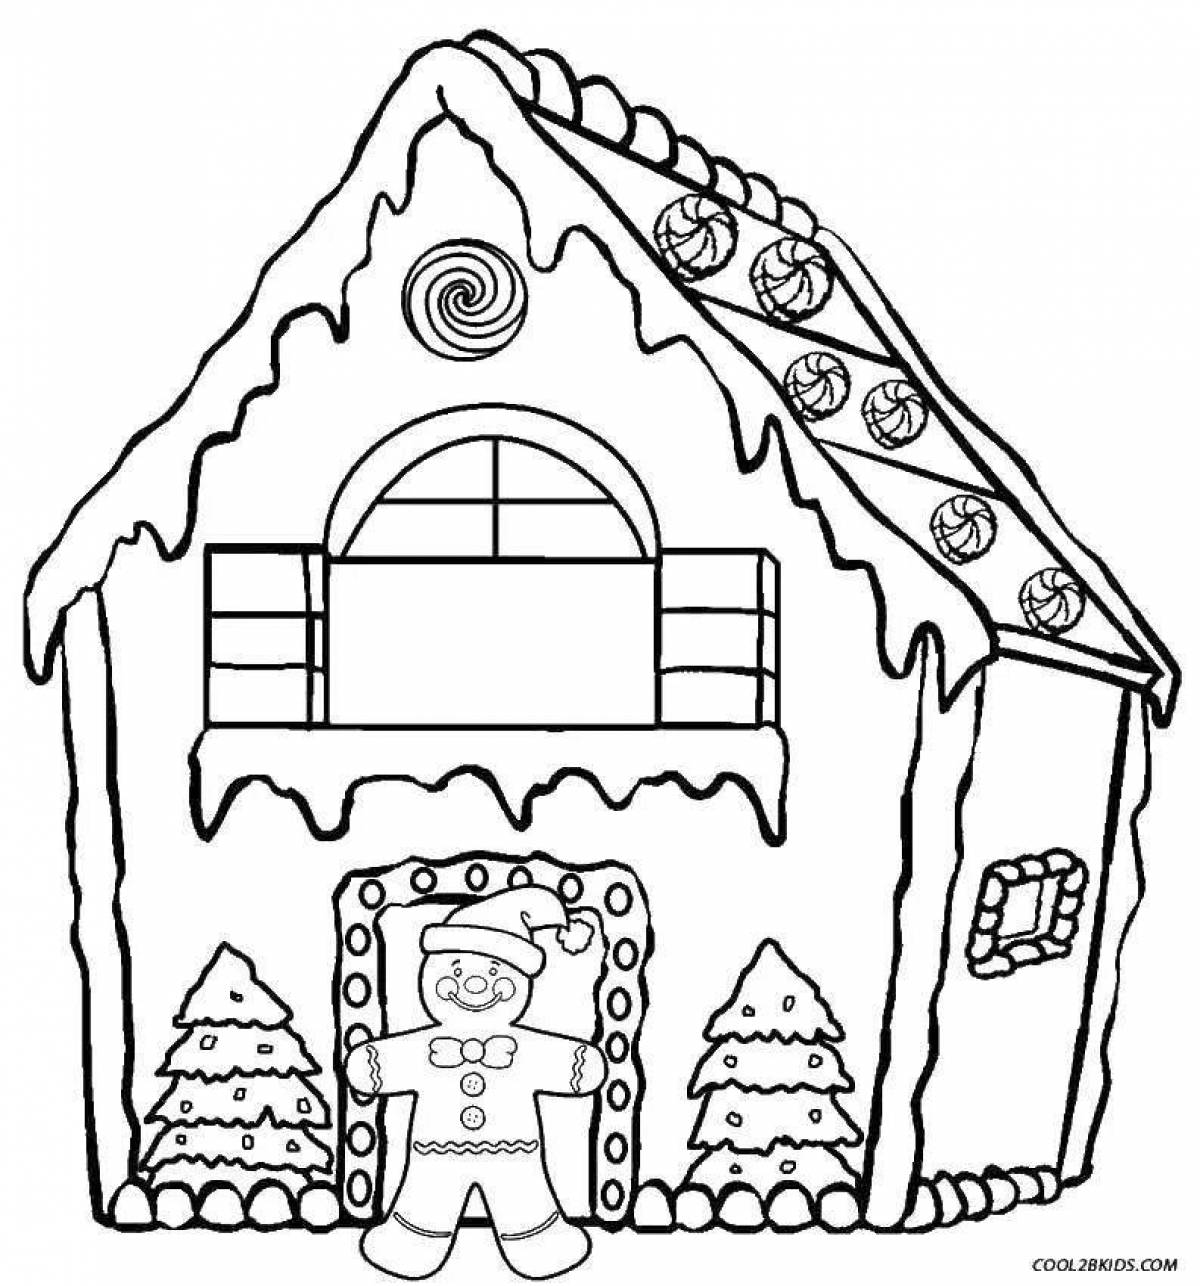 Coloring book bright gingerbread house for children